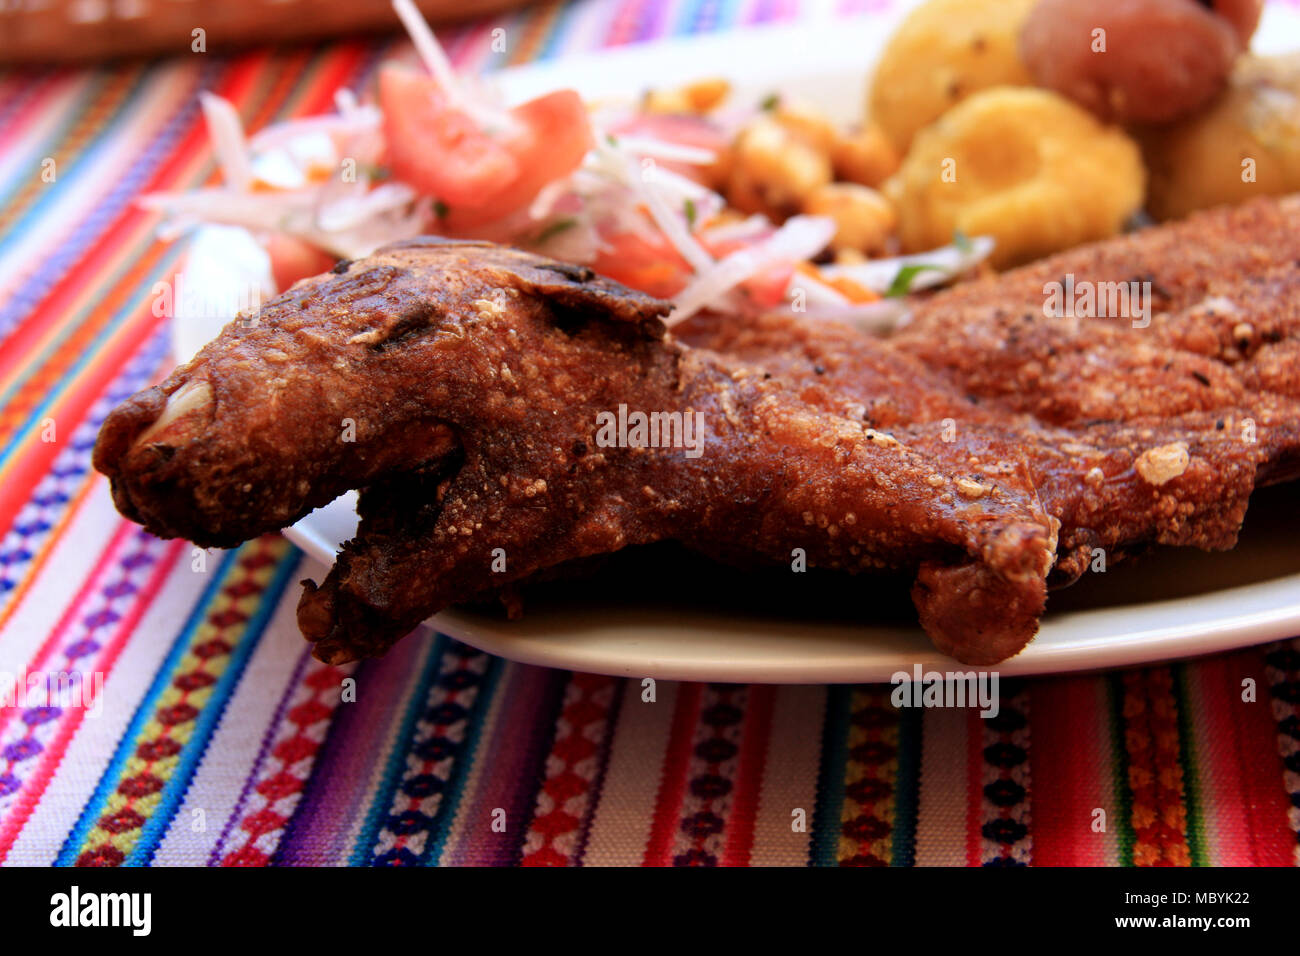 Fried Cuy (Guinea Pig) on a Plate in a Restaurant in Ollantaytambo, Peru Stock Photo